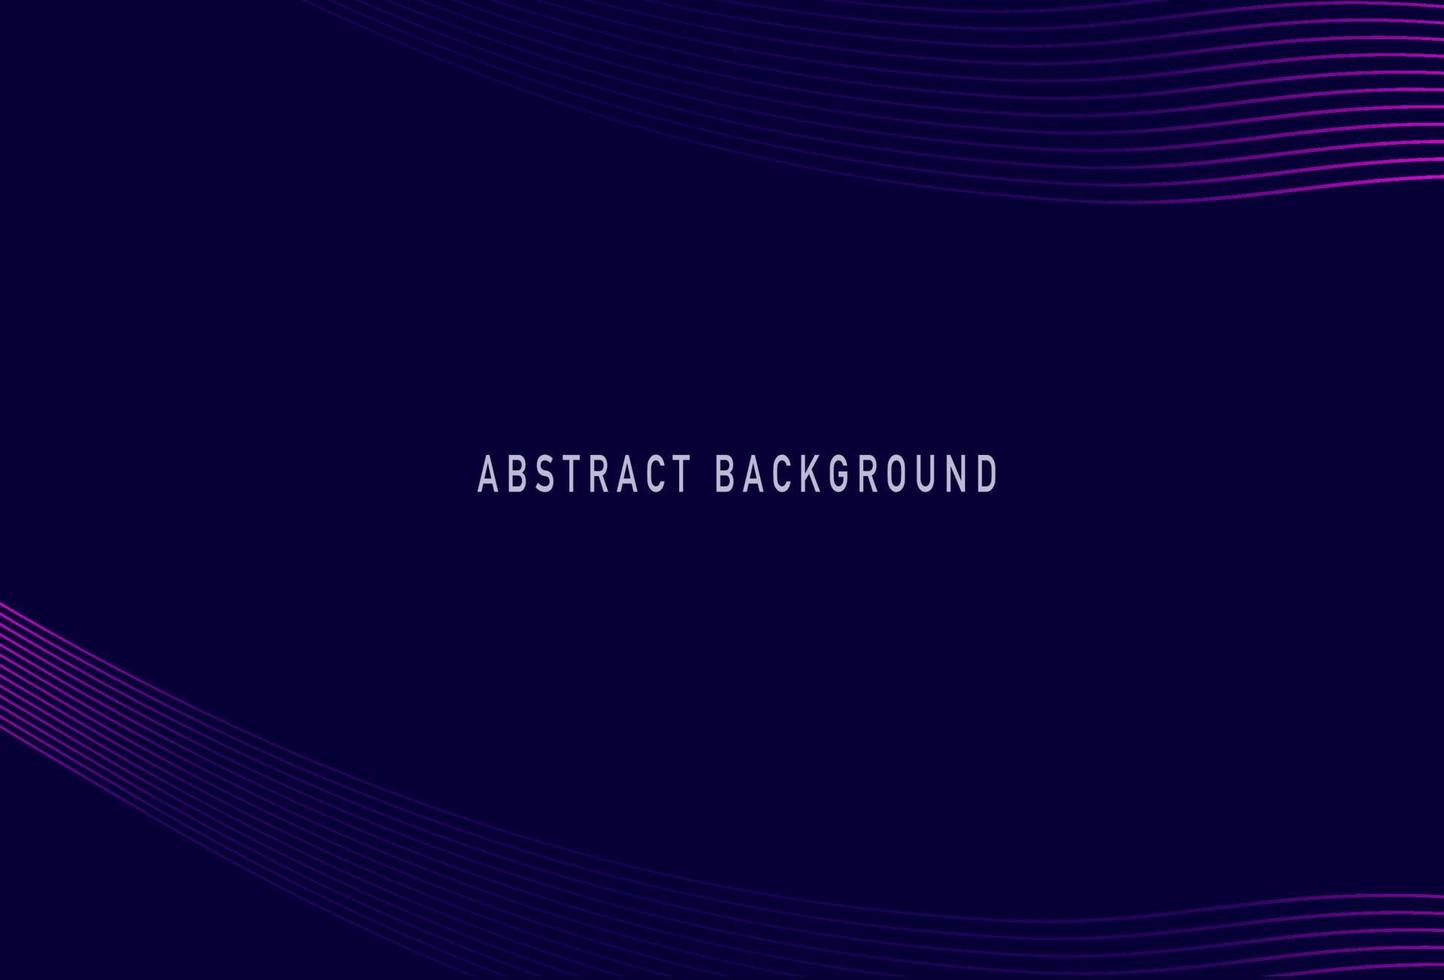 abstract background design with diagonal dark blue line pattern. Vector horizontal template for digital lux business banner, formal invitation, luxury voucher, prestigious gift certificate